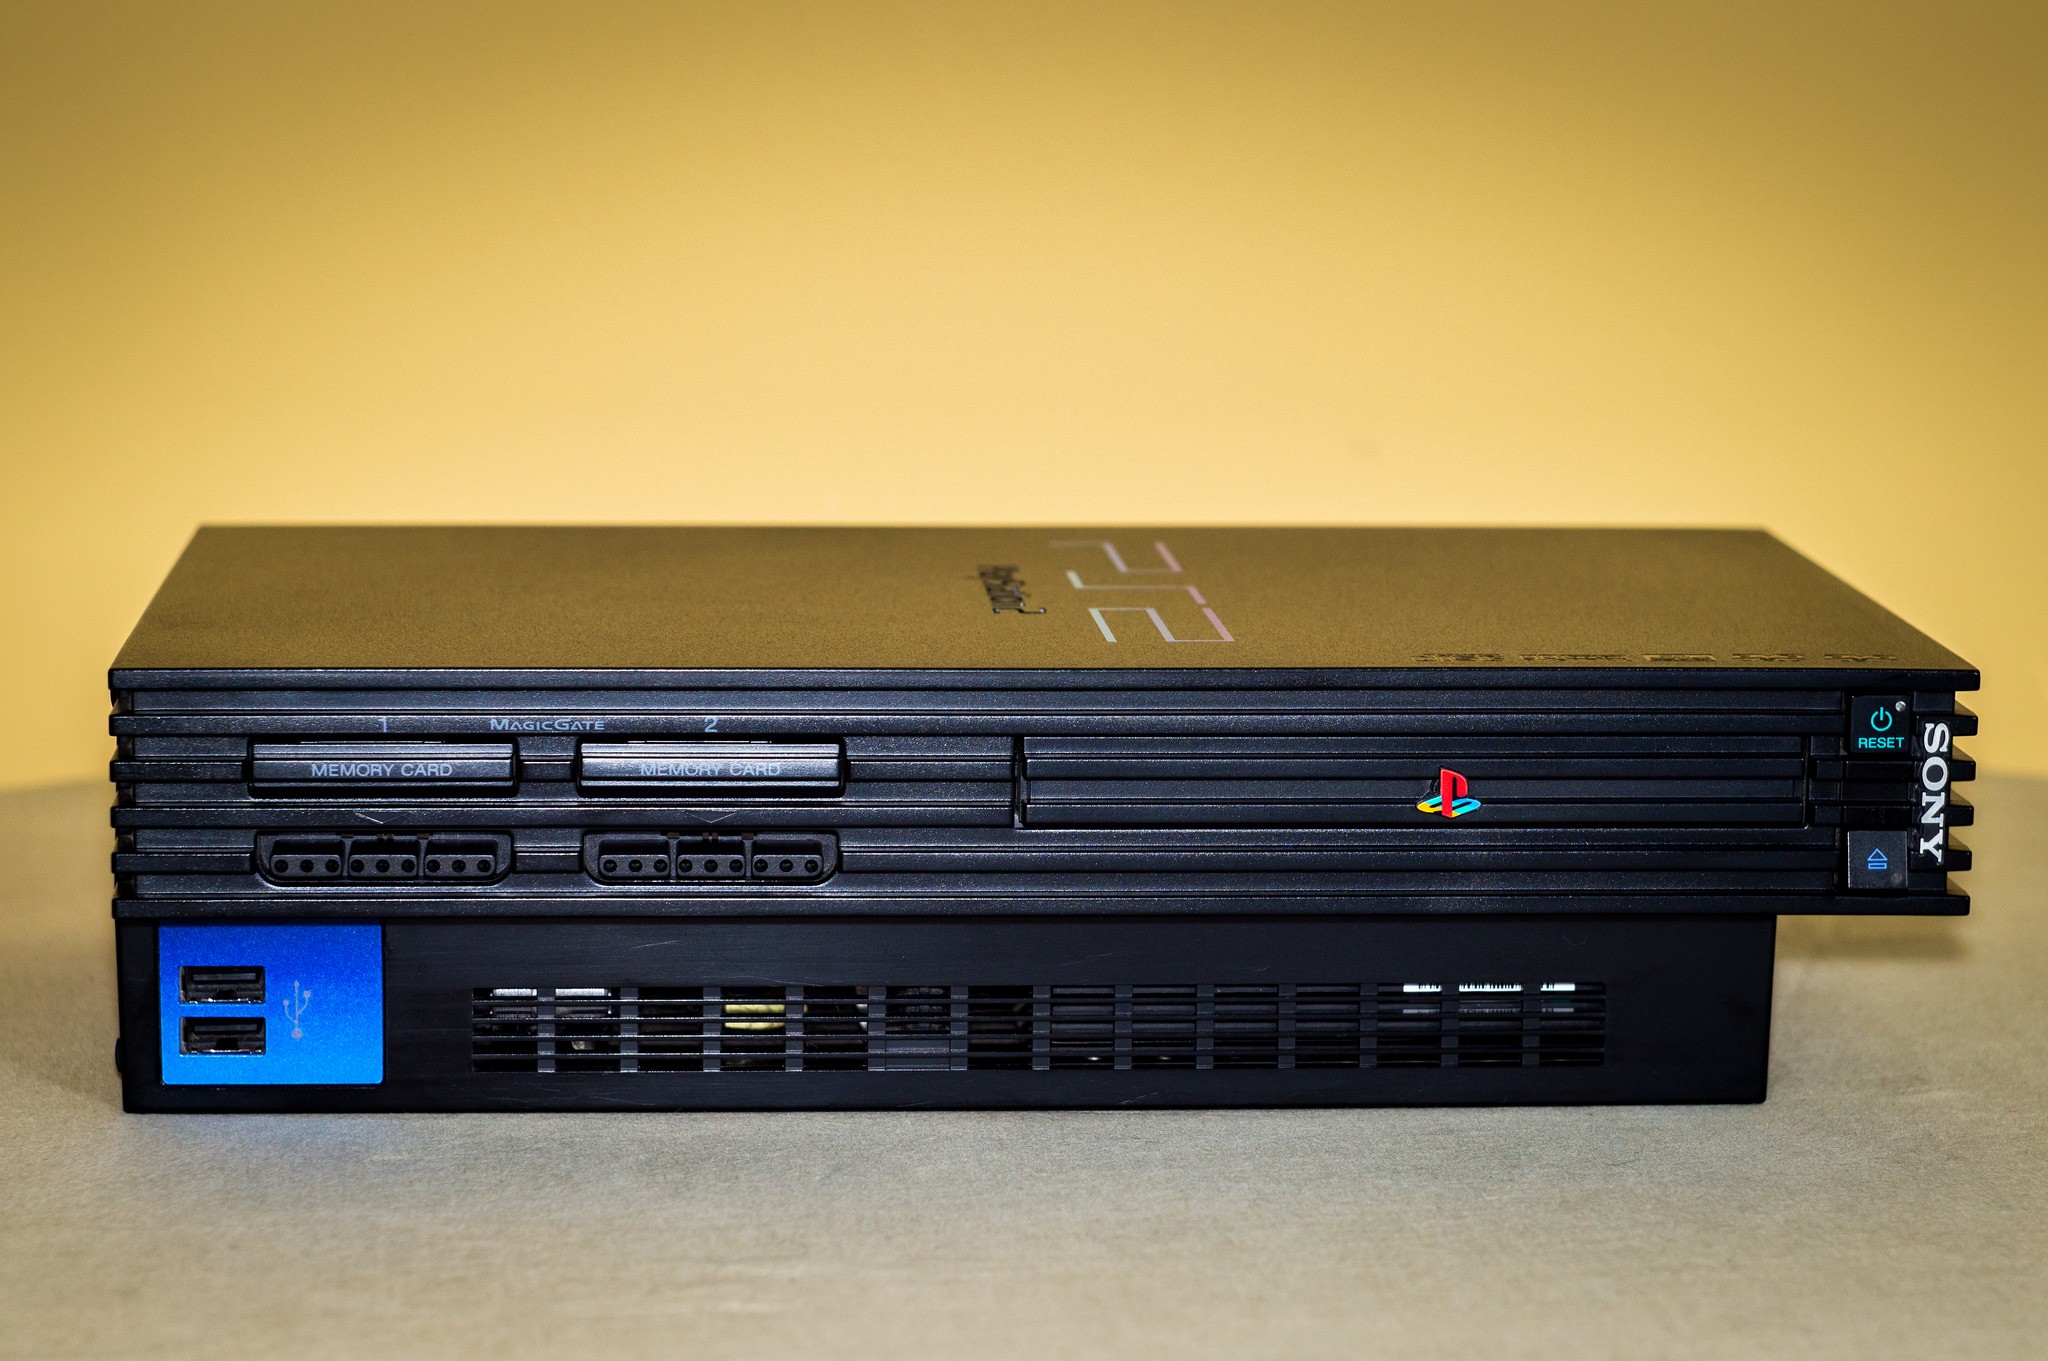 After 18 Years of Telling to Fix it Yourself, Sony Will Stop the PlayStation 2